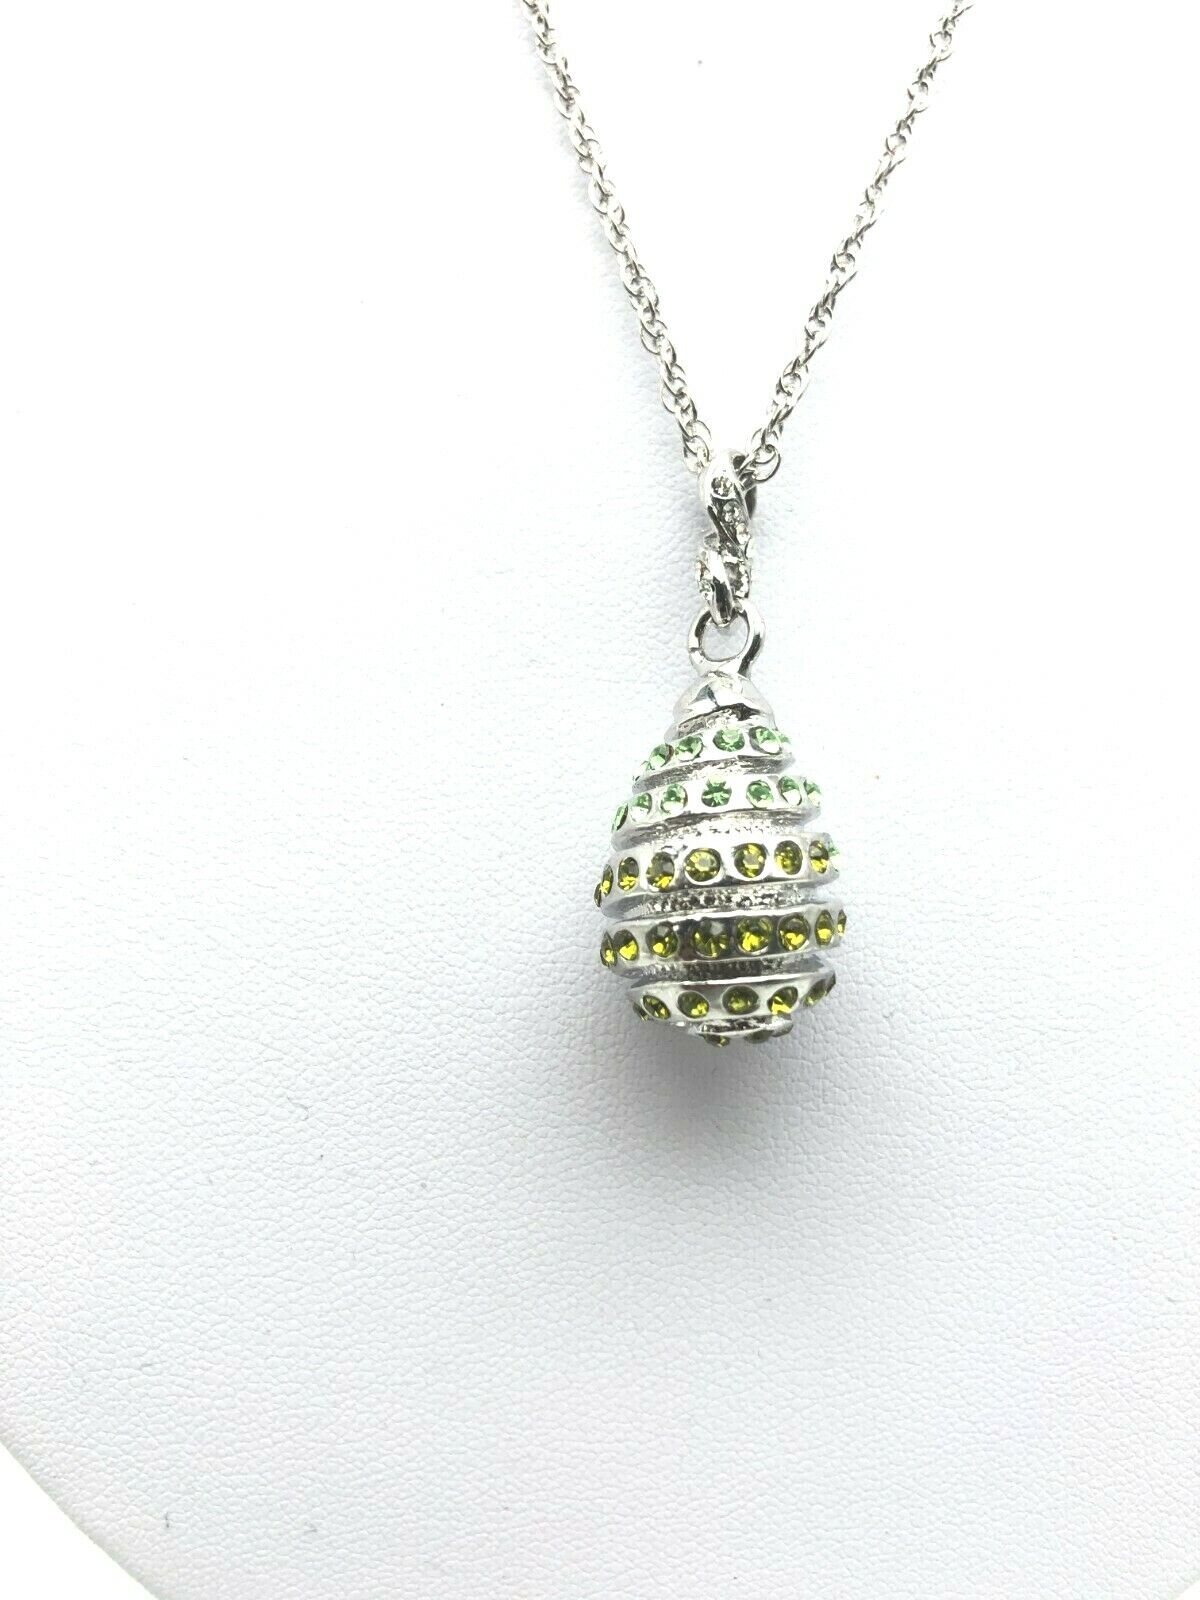 Silver and green Egg Pendant Necklace with crystals by Keren Kopal